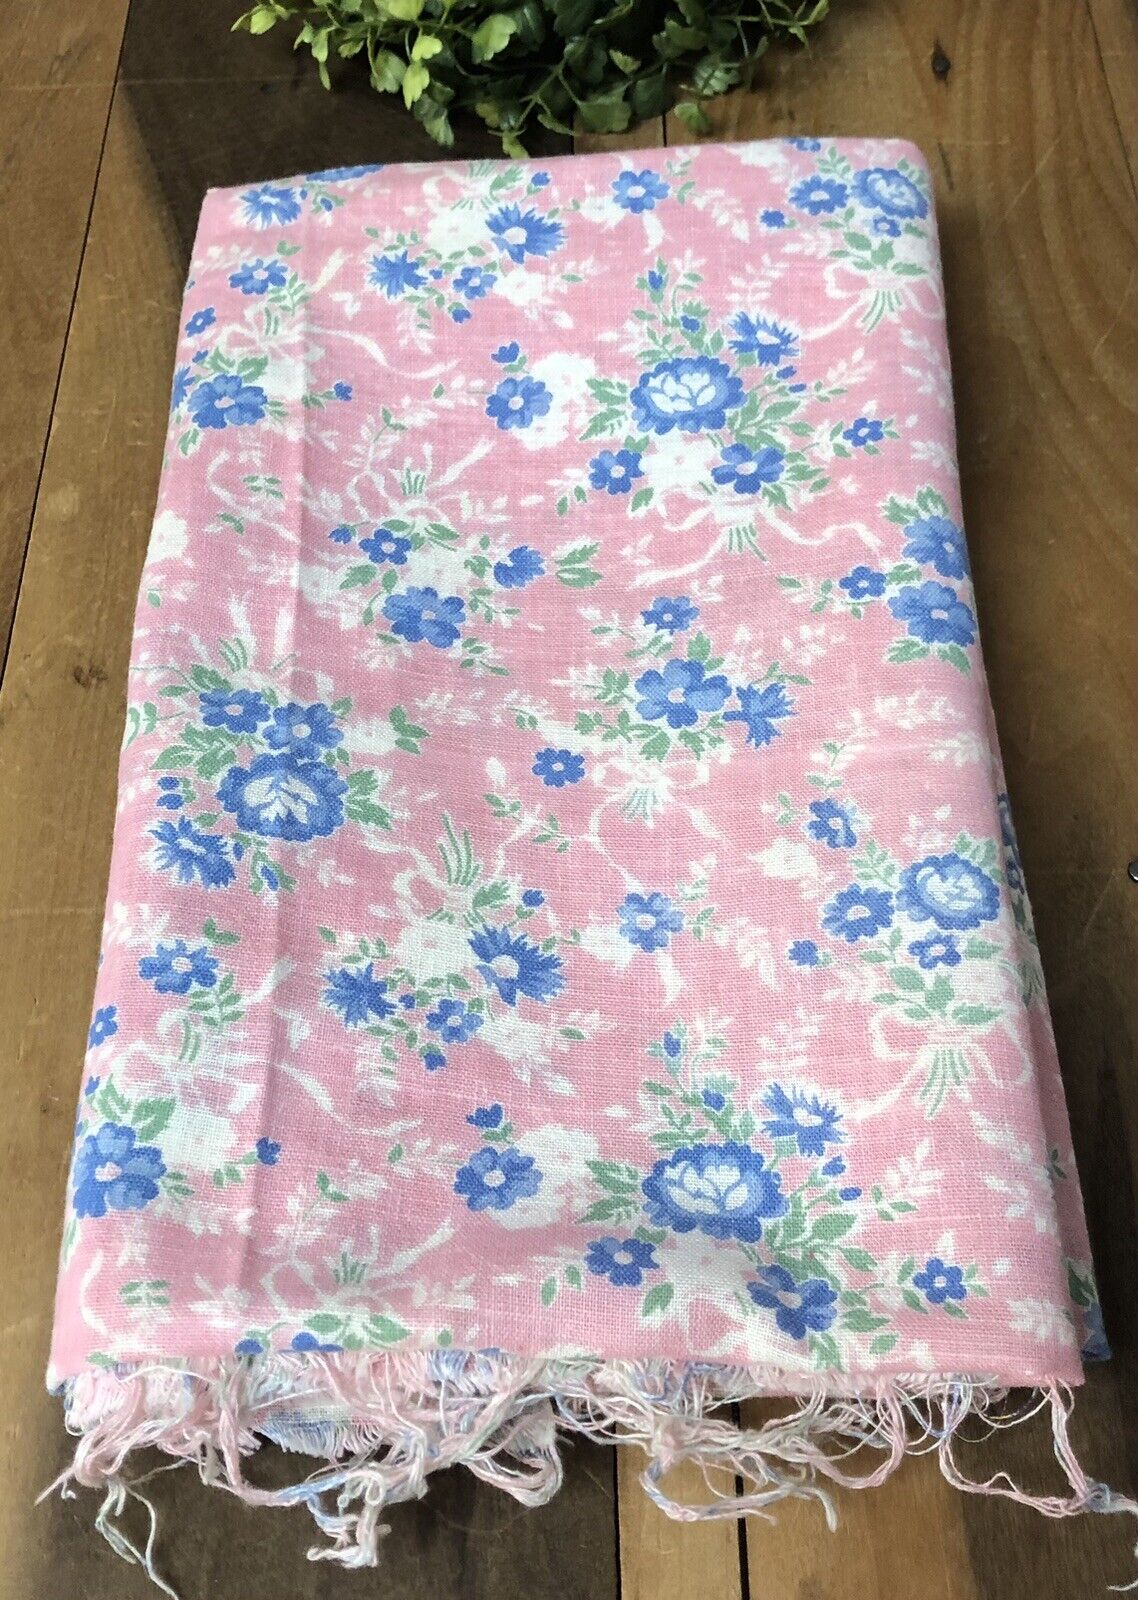 Vintage Opened Feed Sack Cotton PINK Floral Fabric AS IS Please READ Description